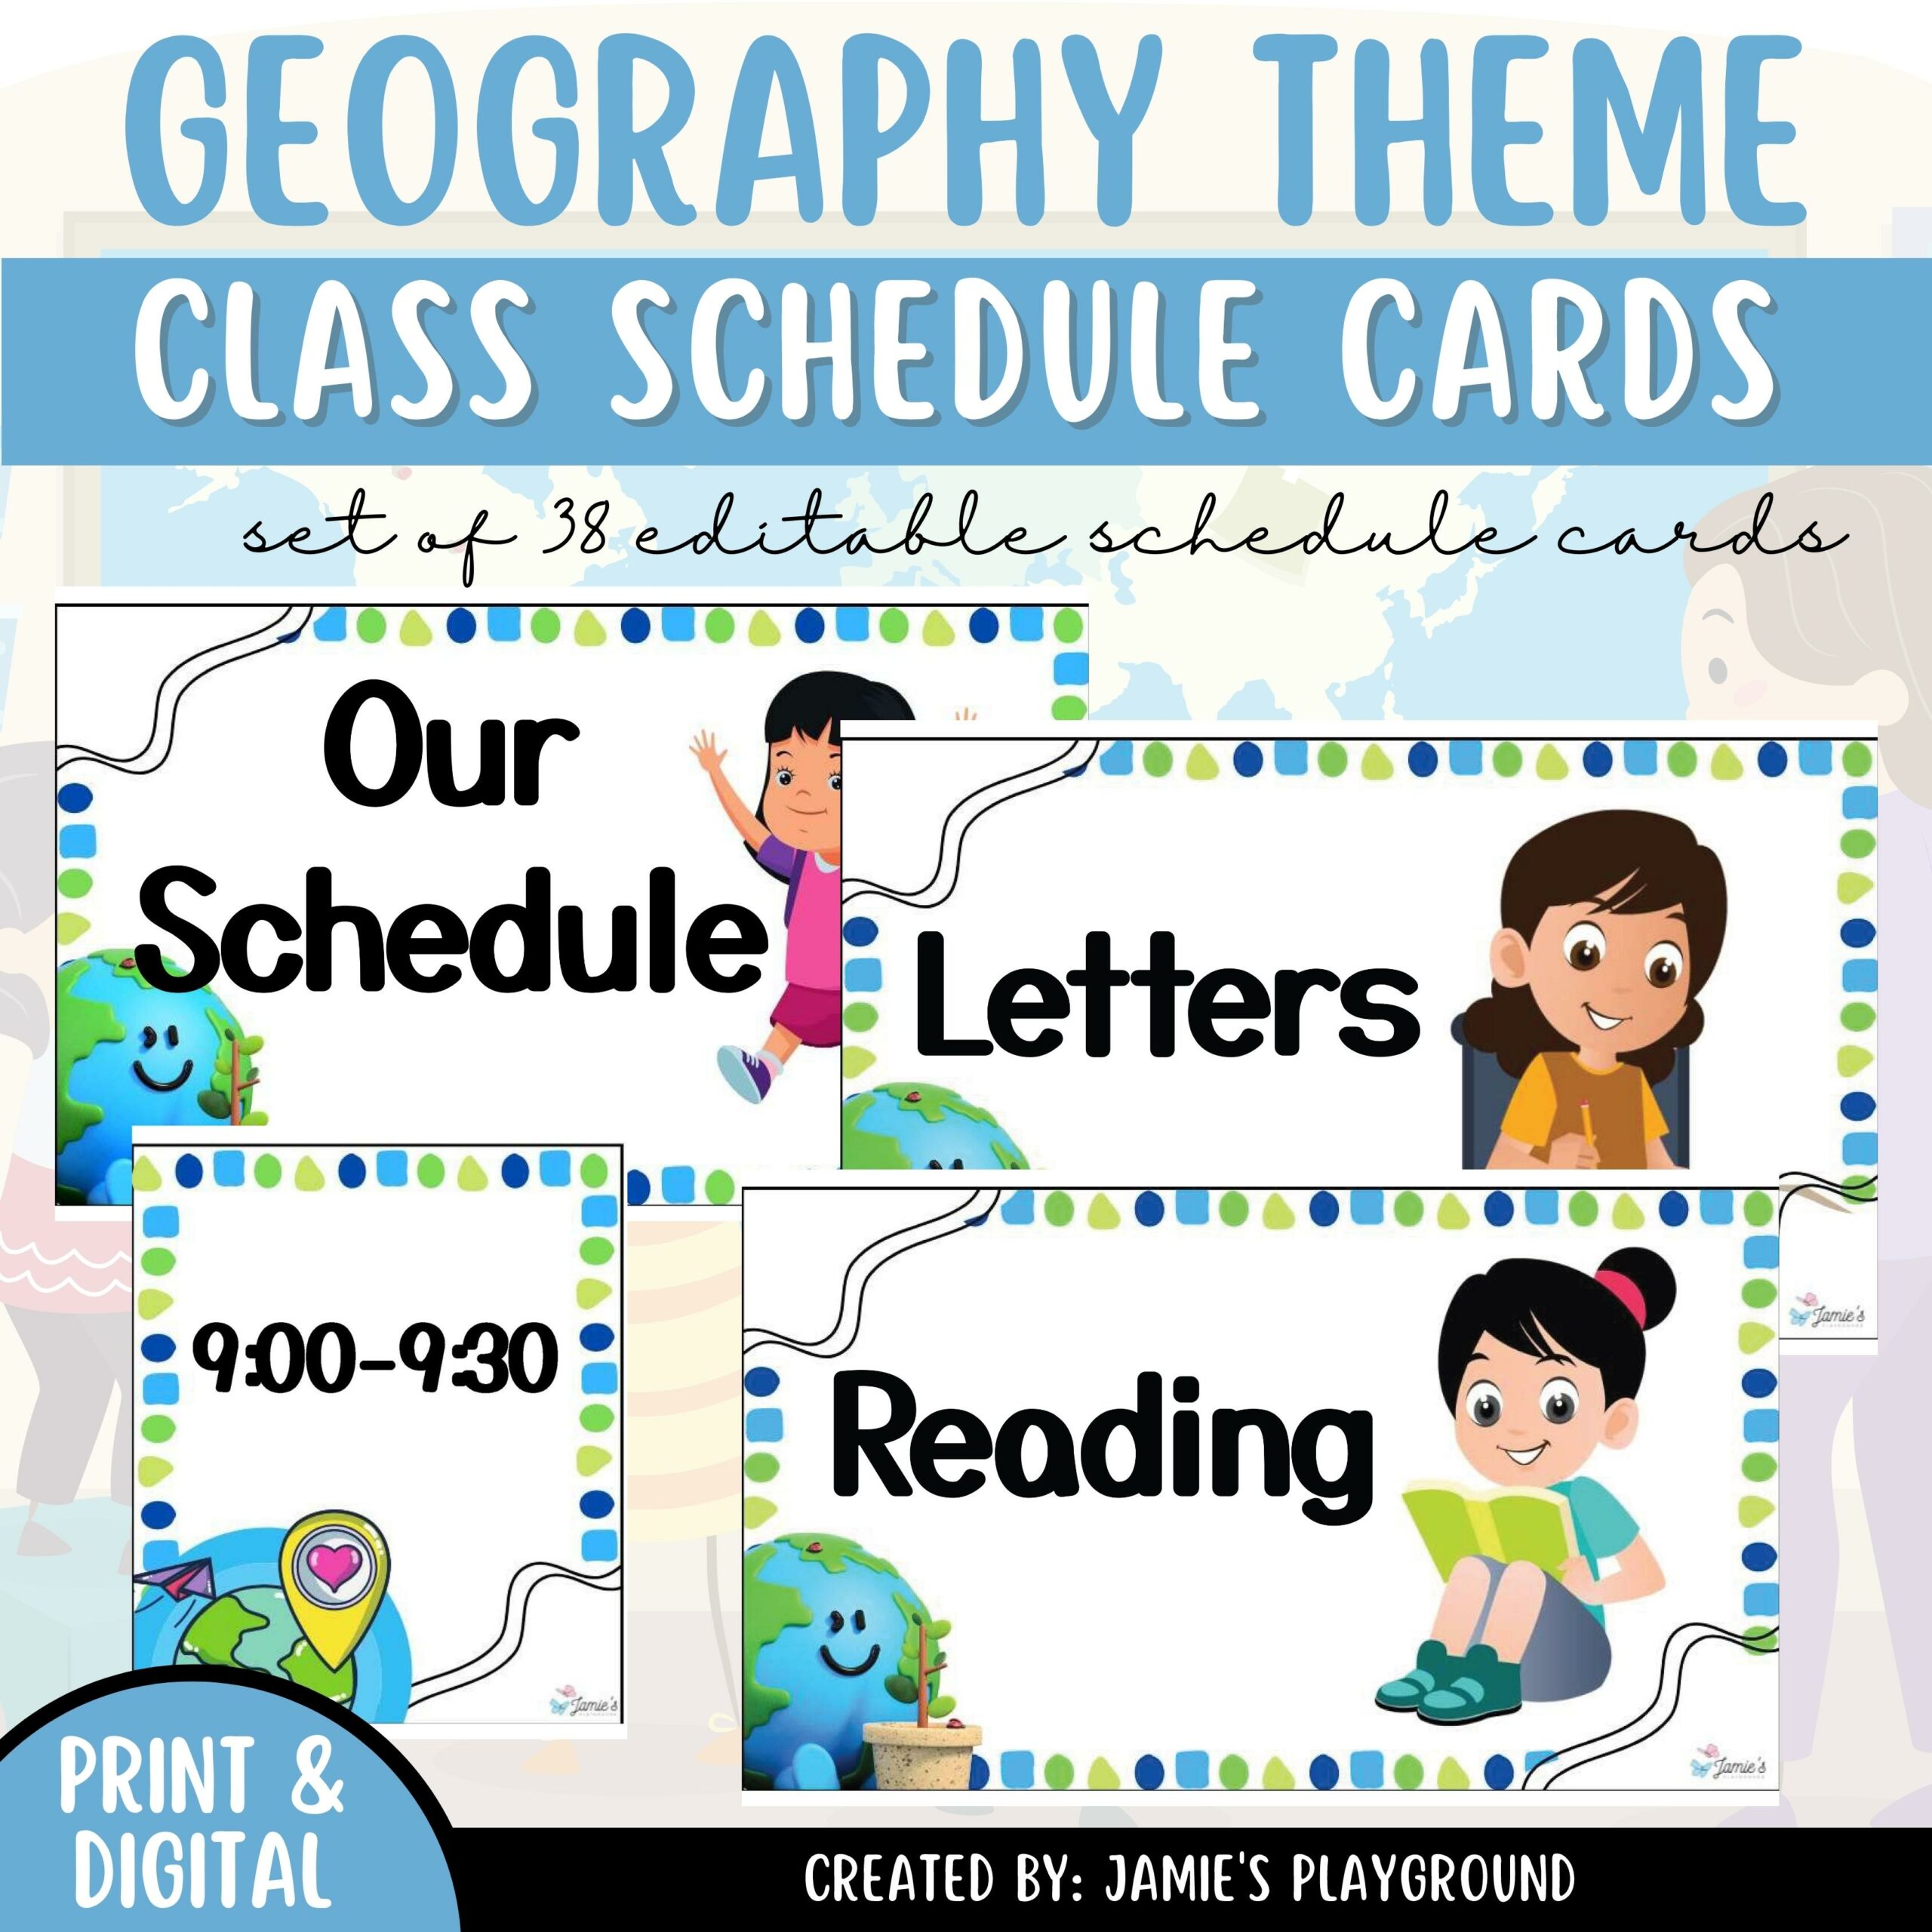 Classroom Schedule Cards - EDITABLE Geography Daily Visual Schedule Cards